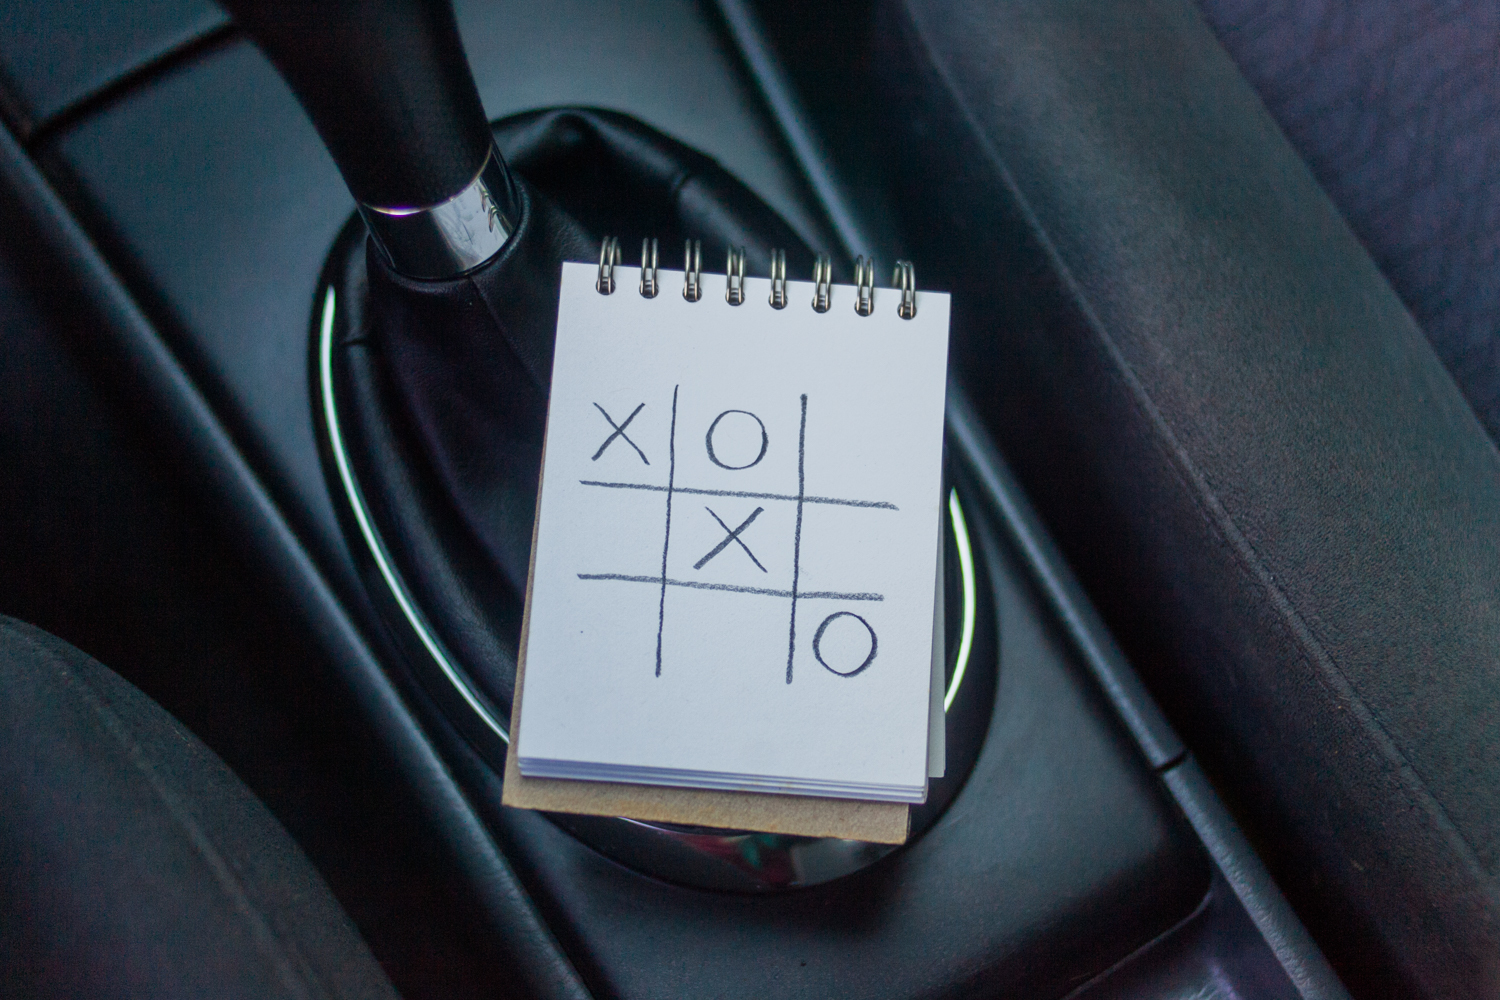 Road trip games: playing tic-tac-toe in the car.